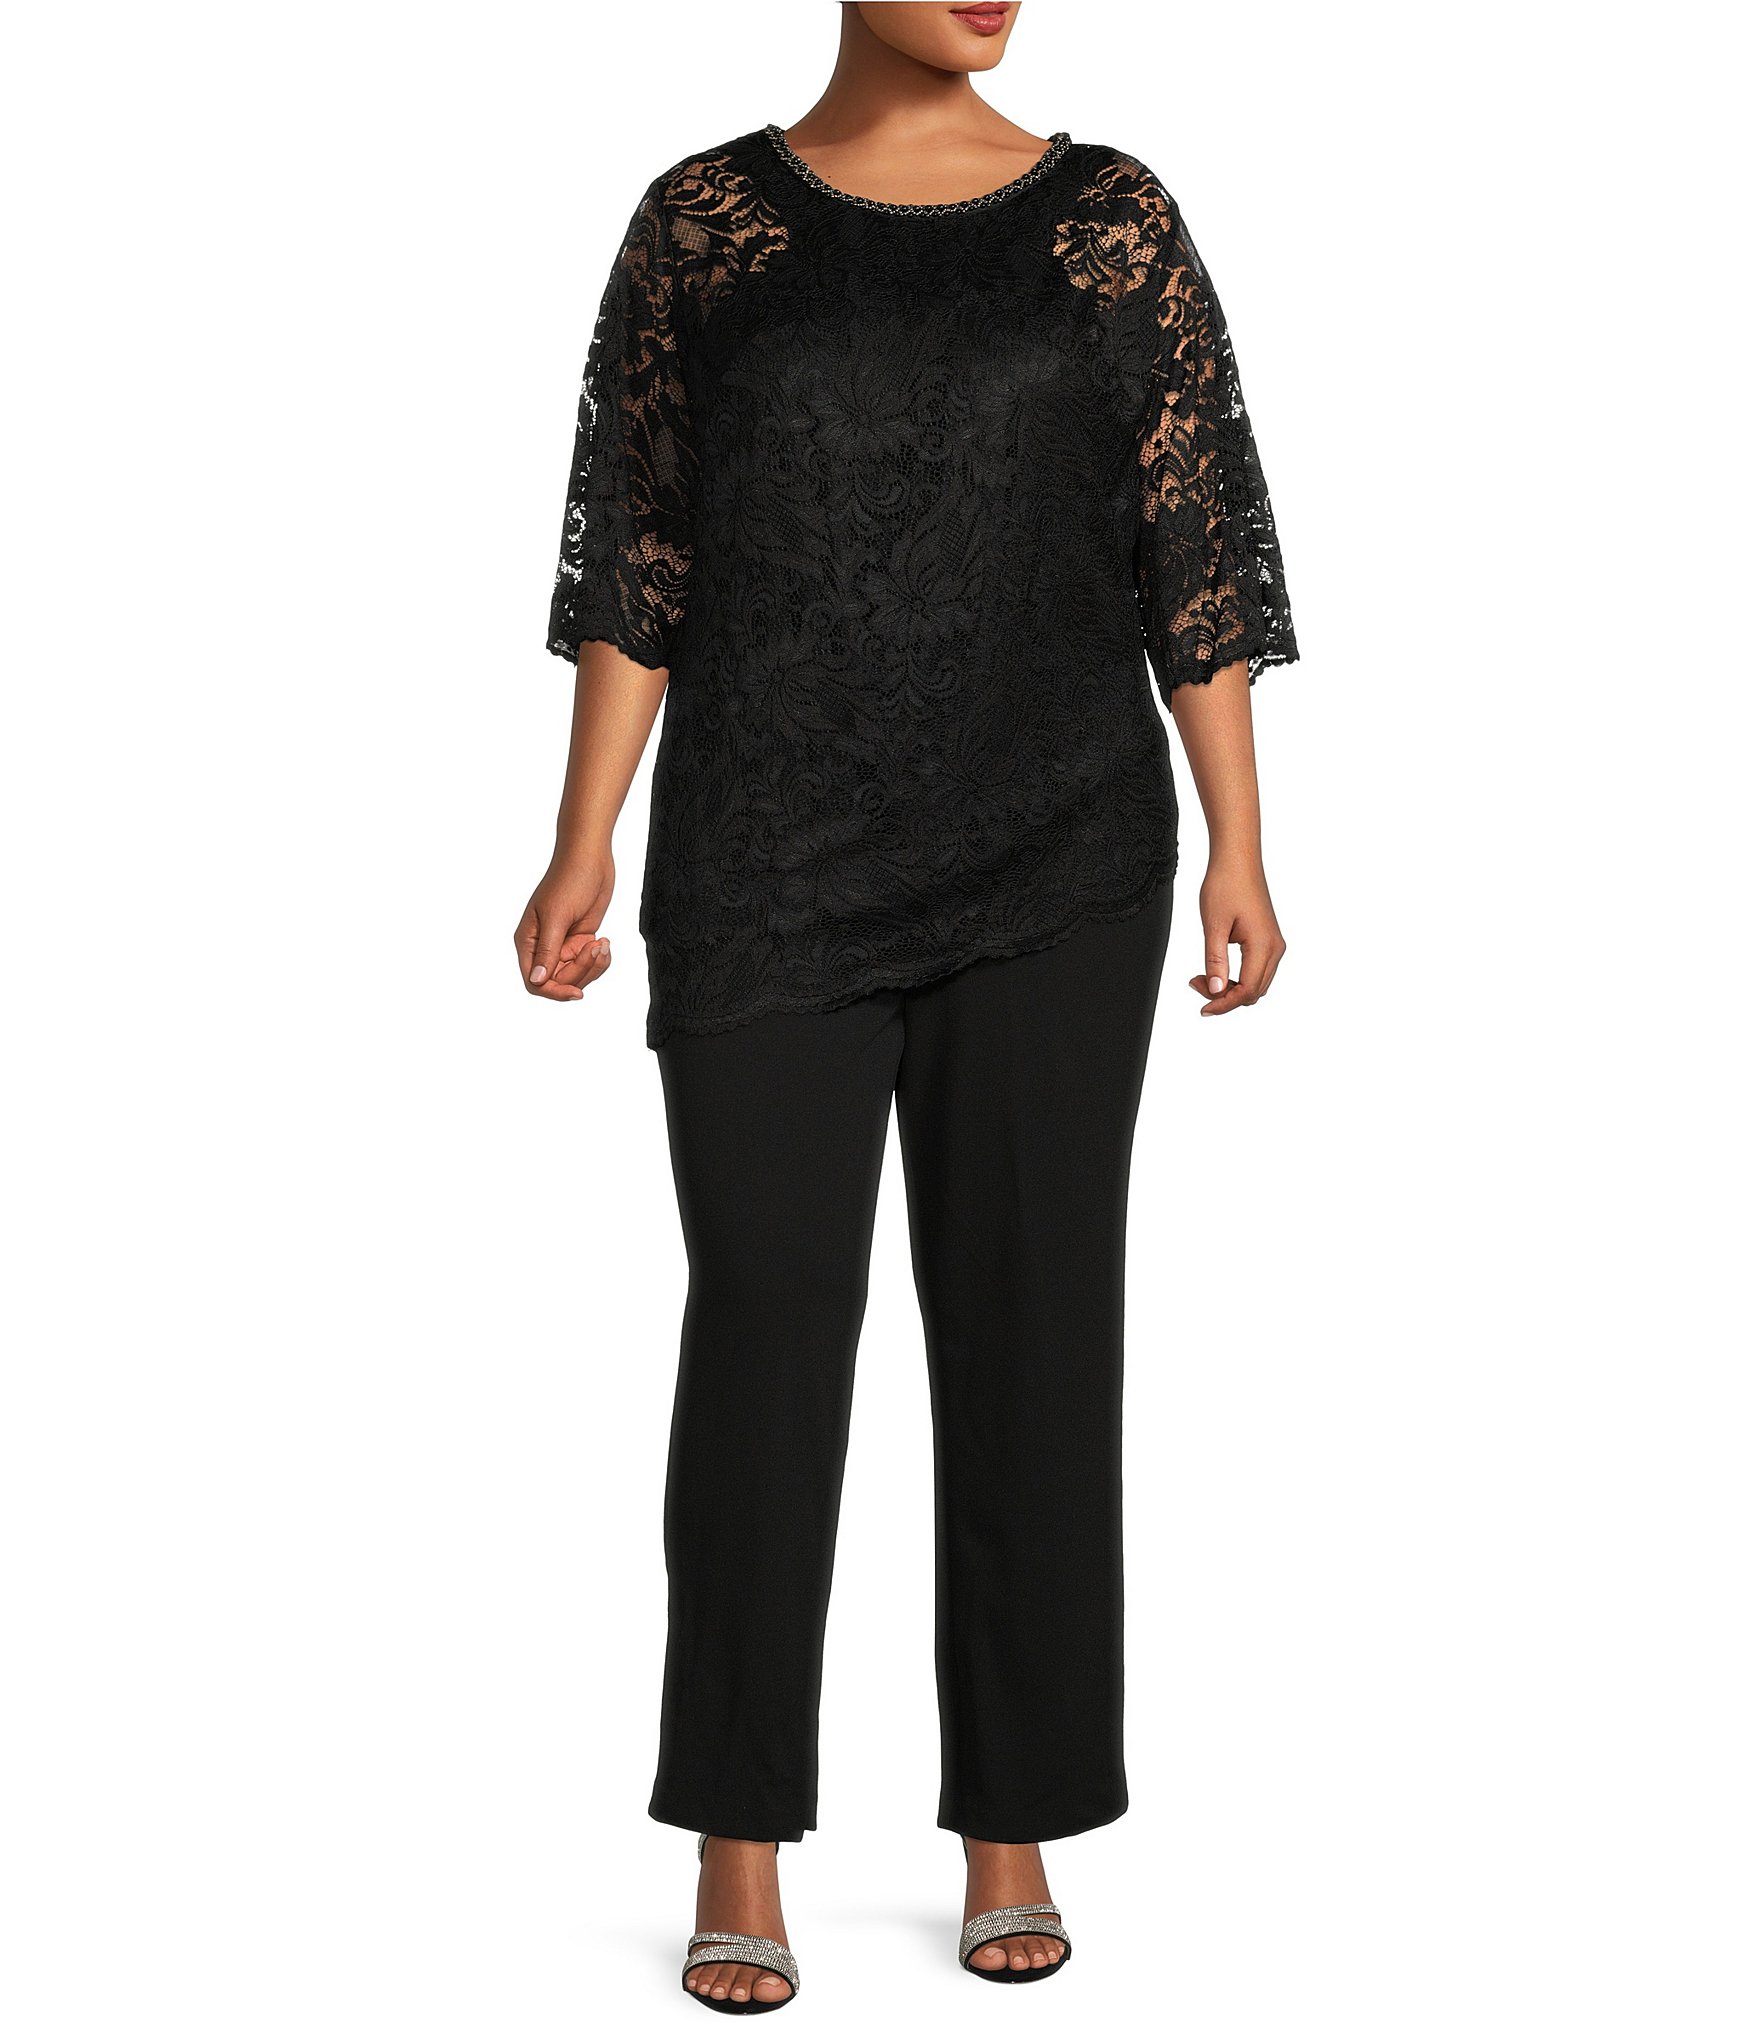 Le Bos Plus Size Stretch Lace 3/4 Sleeve Beaded Round Neck 2-Piece Pant ...